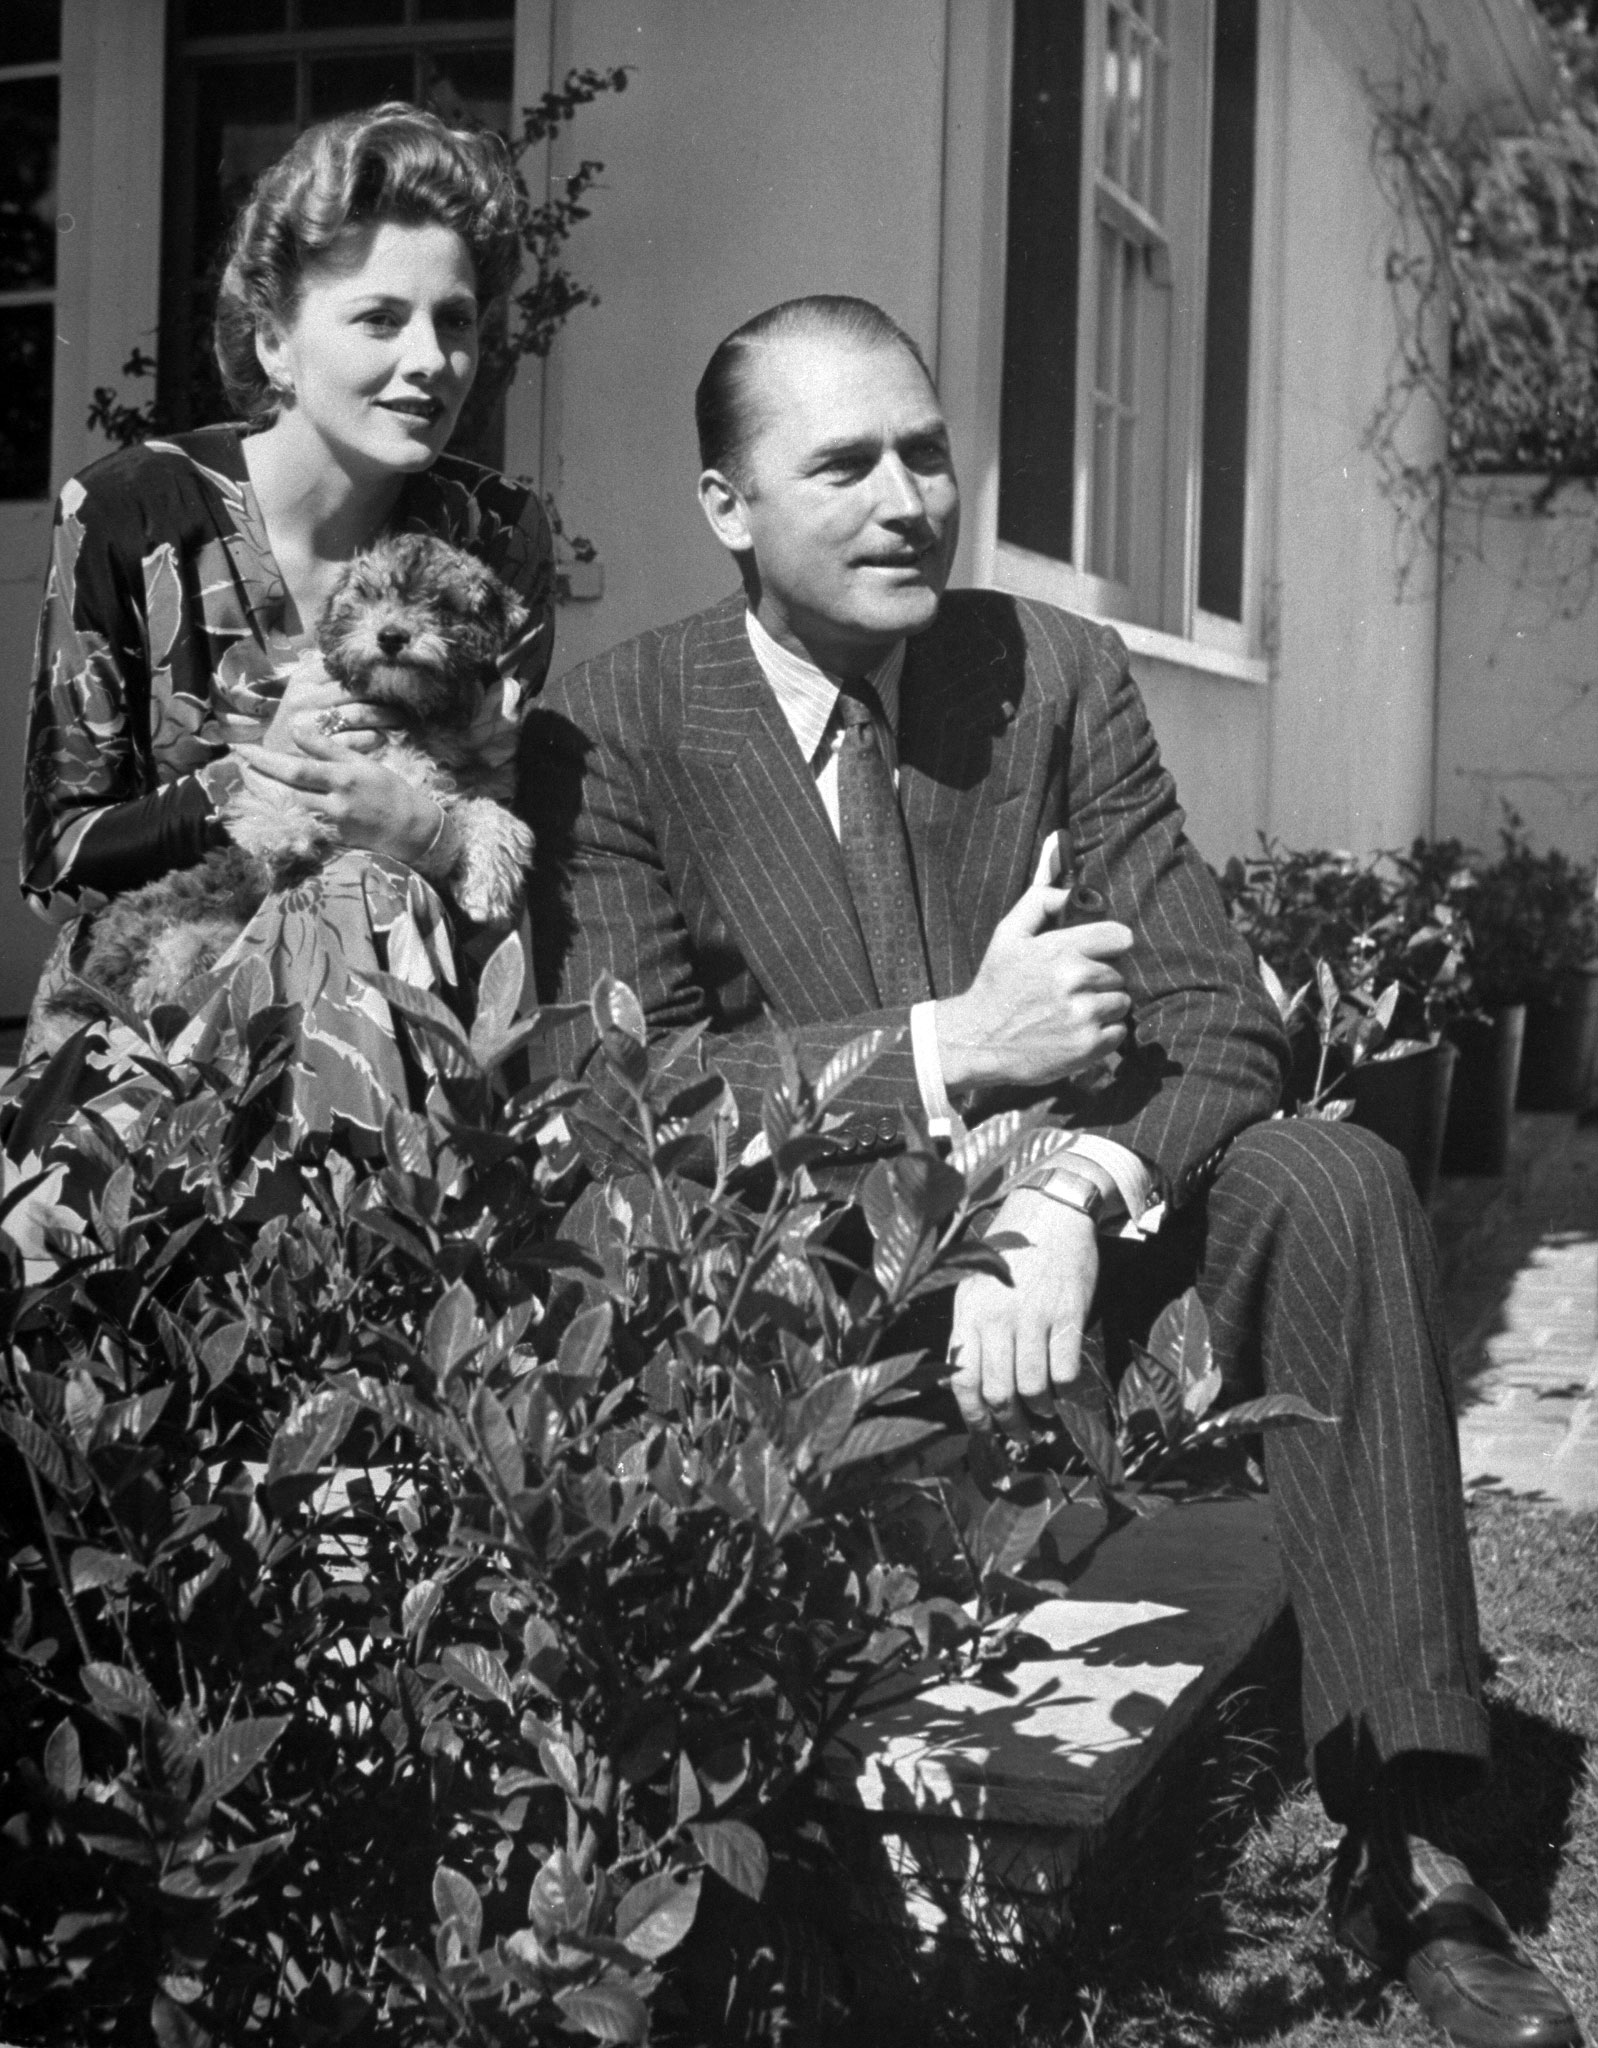 Joan Fontaine with her husband Brian Aherne and her dog, 1942.